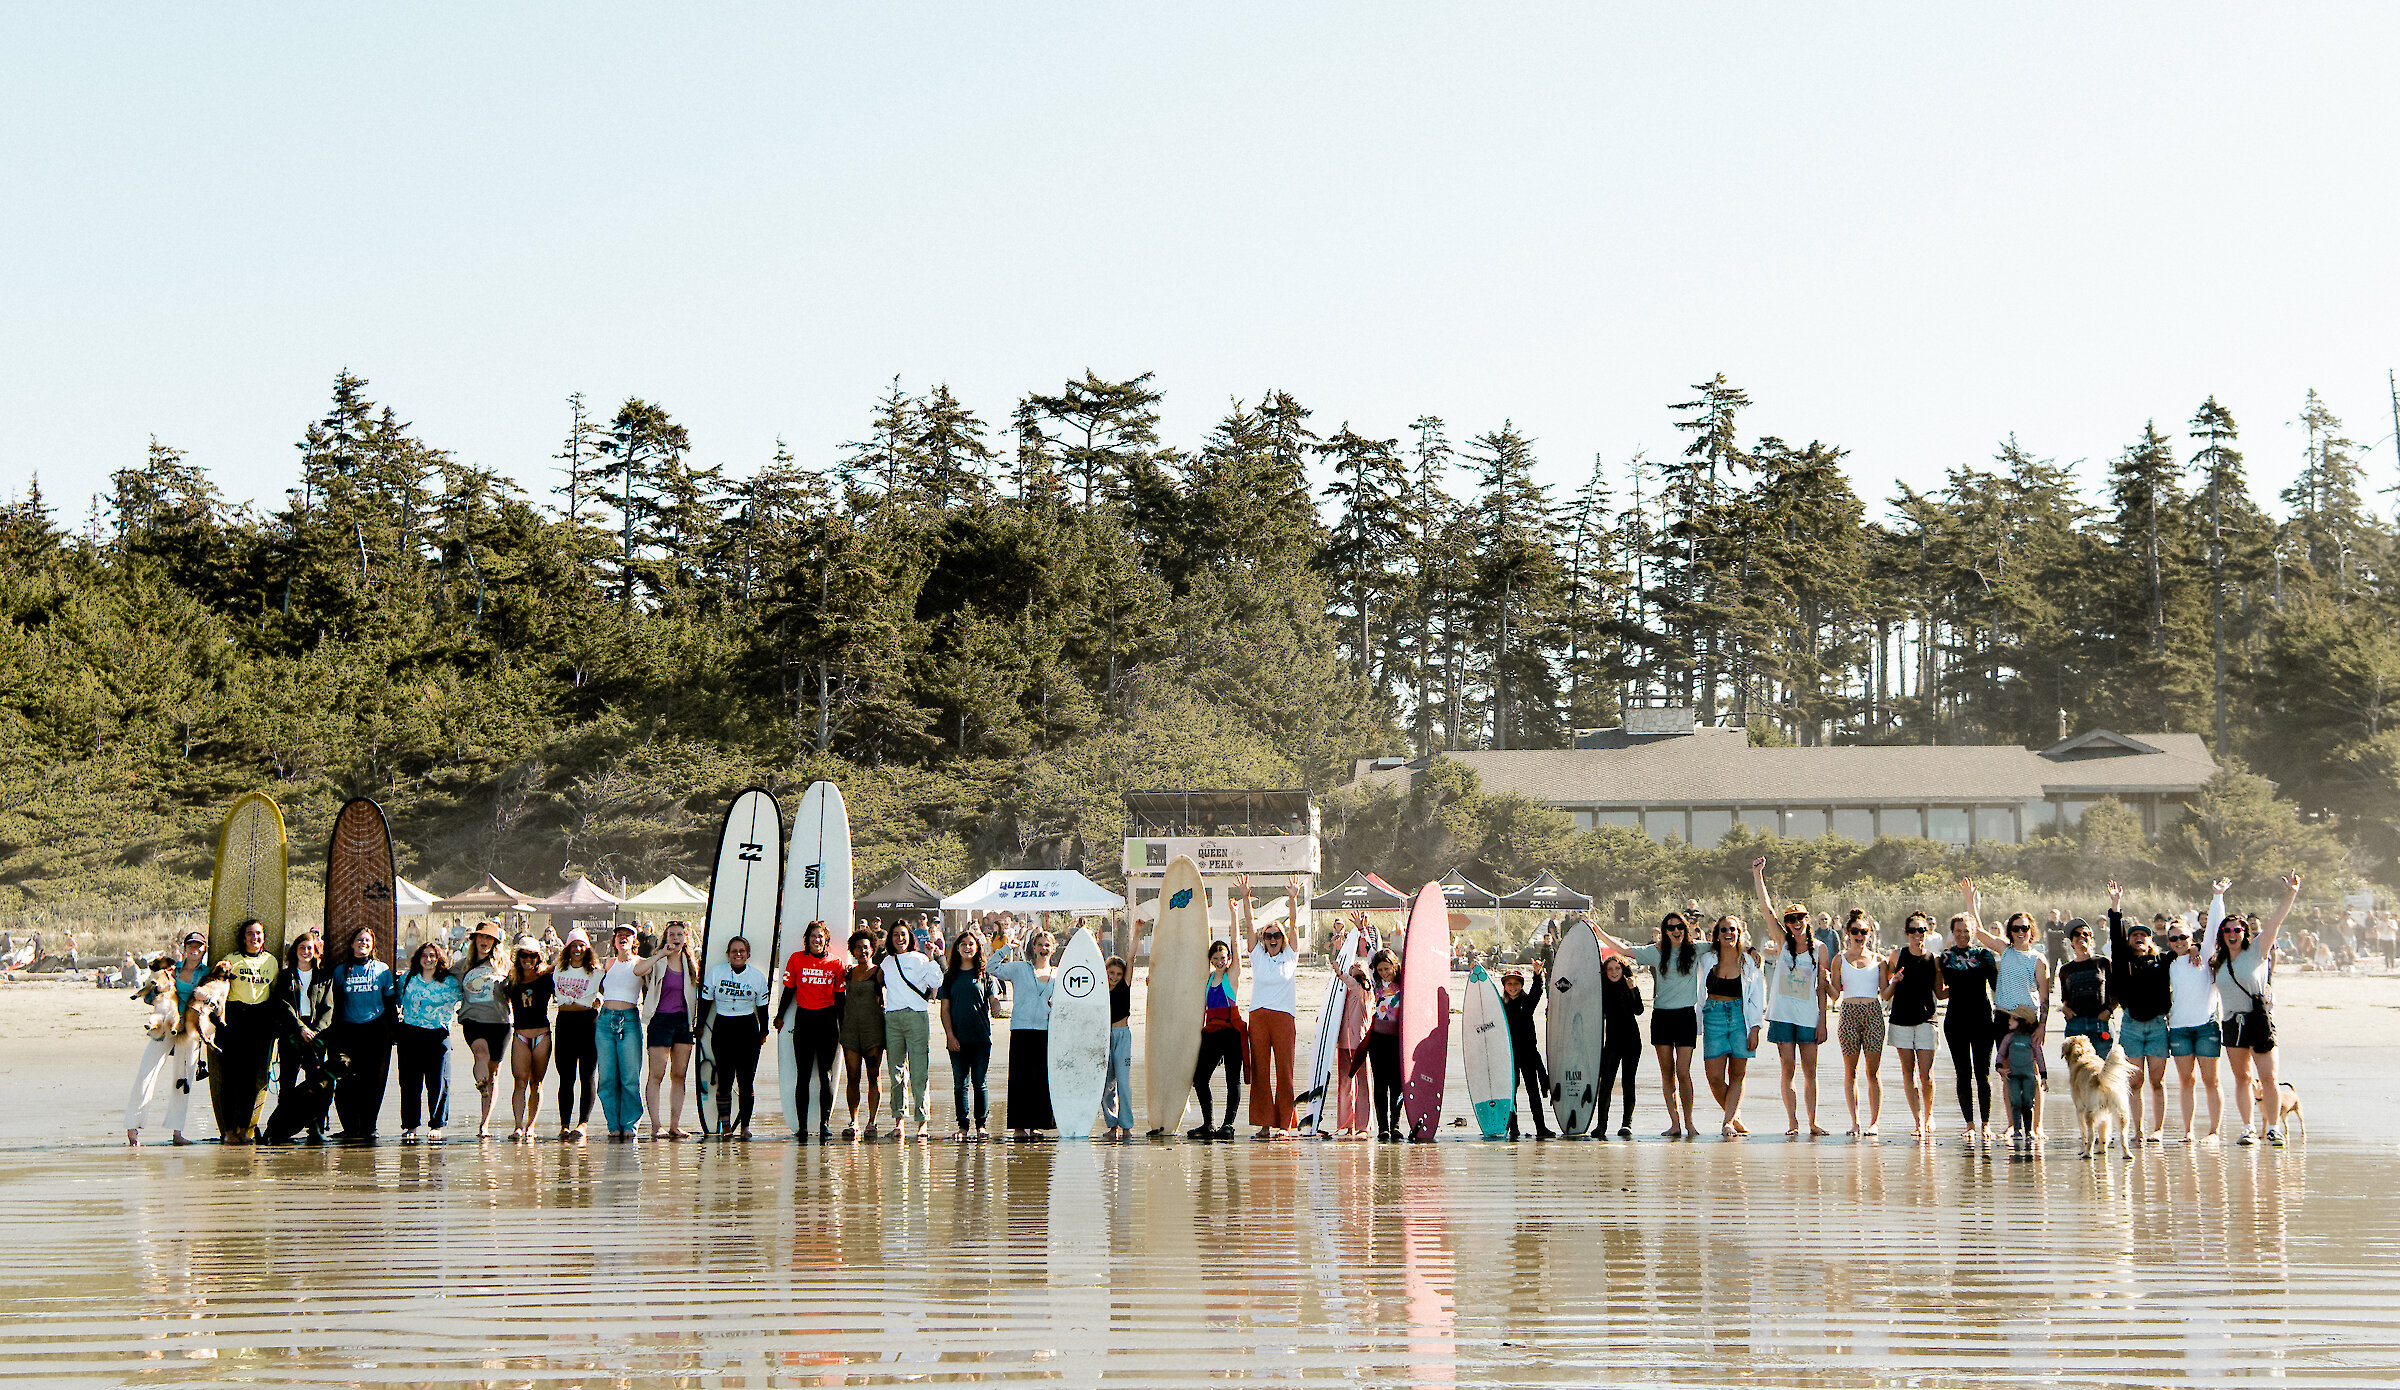 competitors at Queen of the Peak Women's Surf Contest